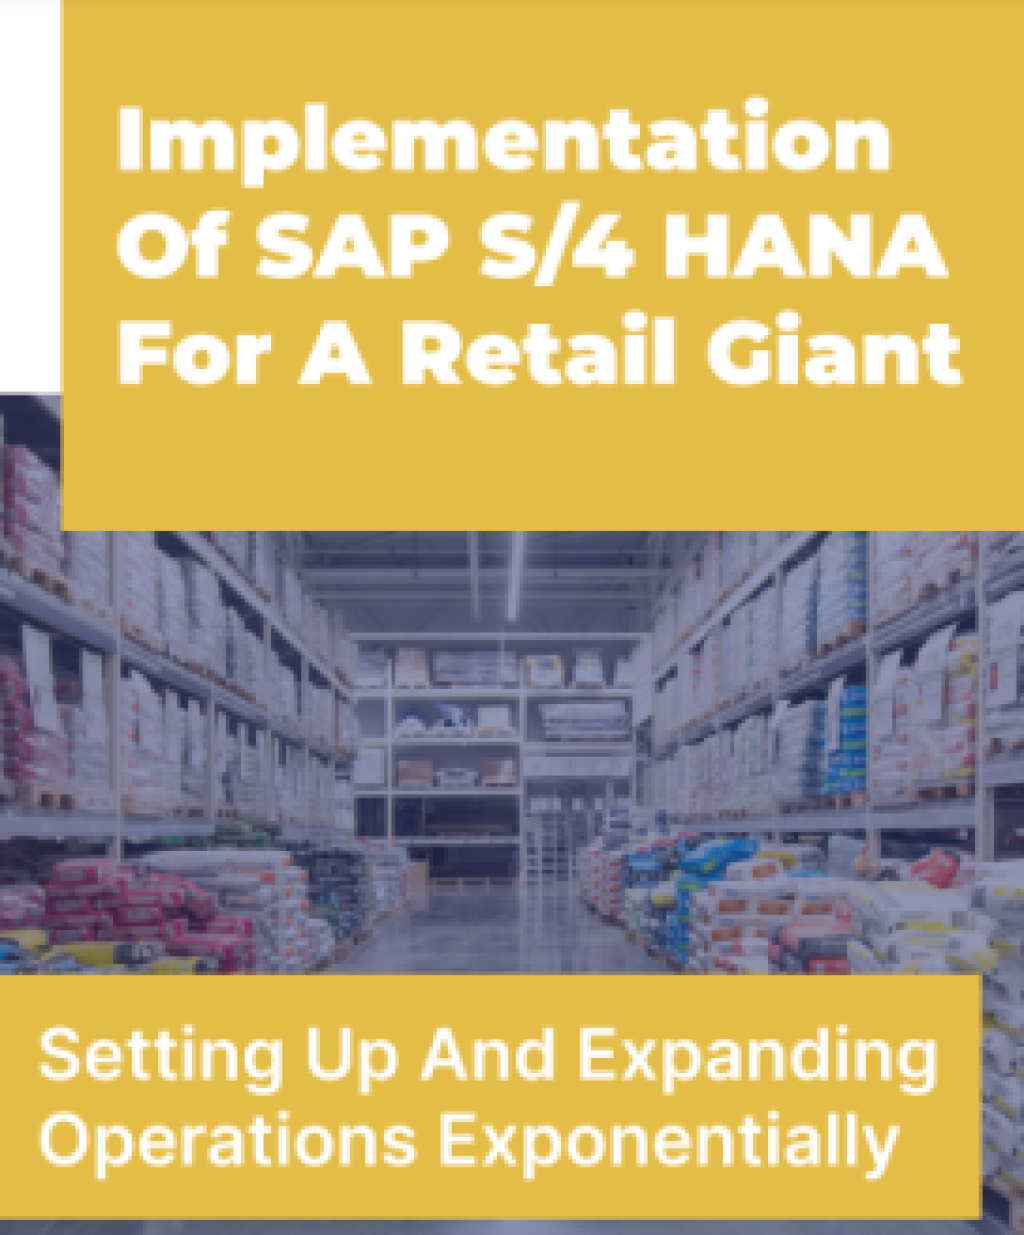 Implementation of SAP S/4 HANA for a Retail Giant